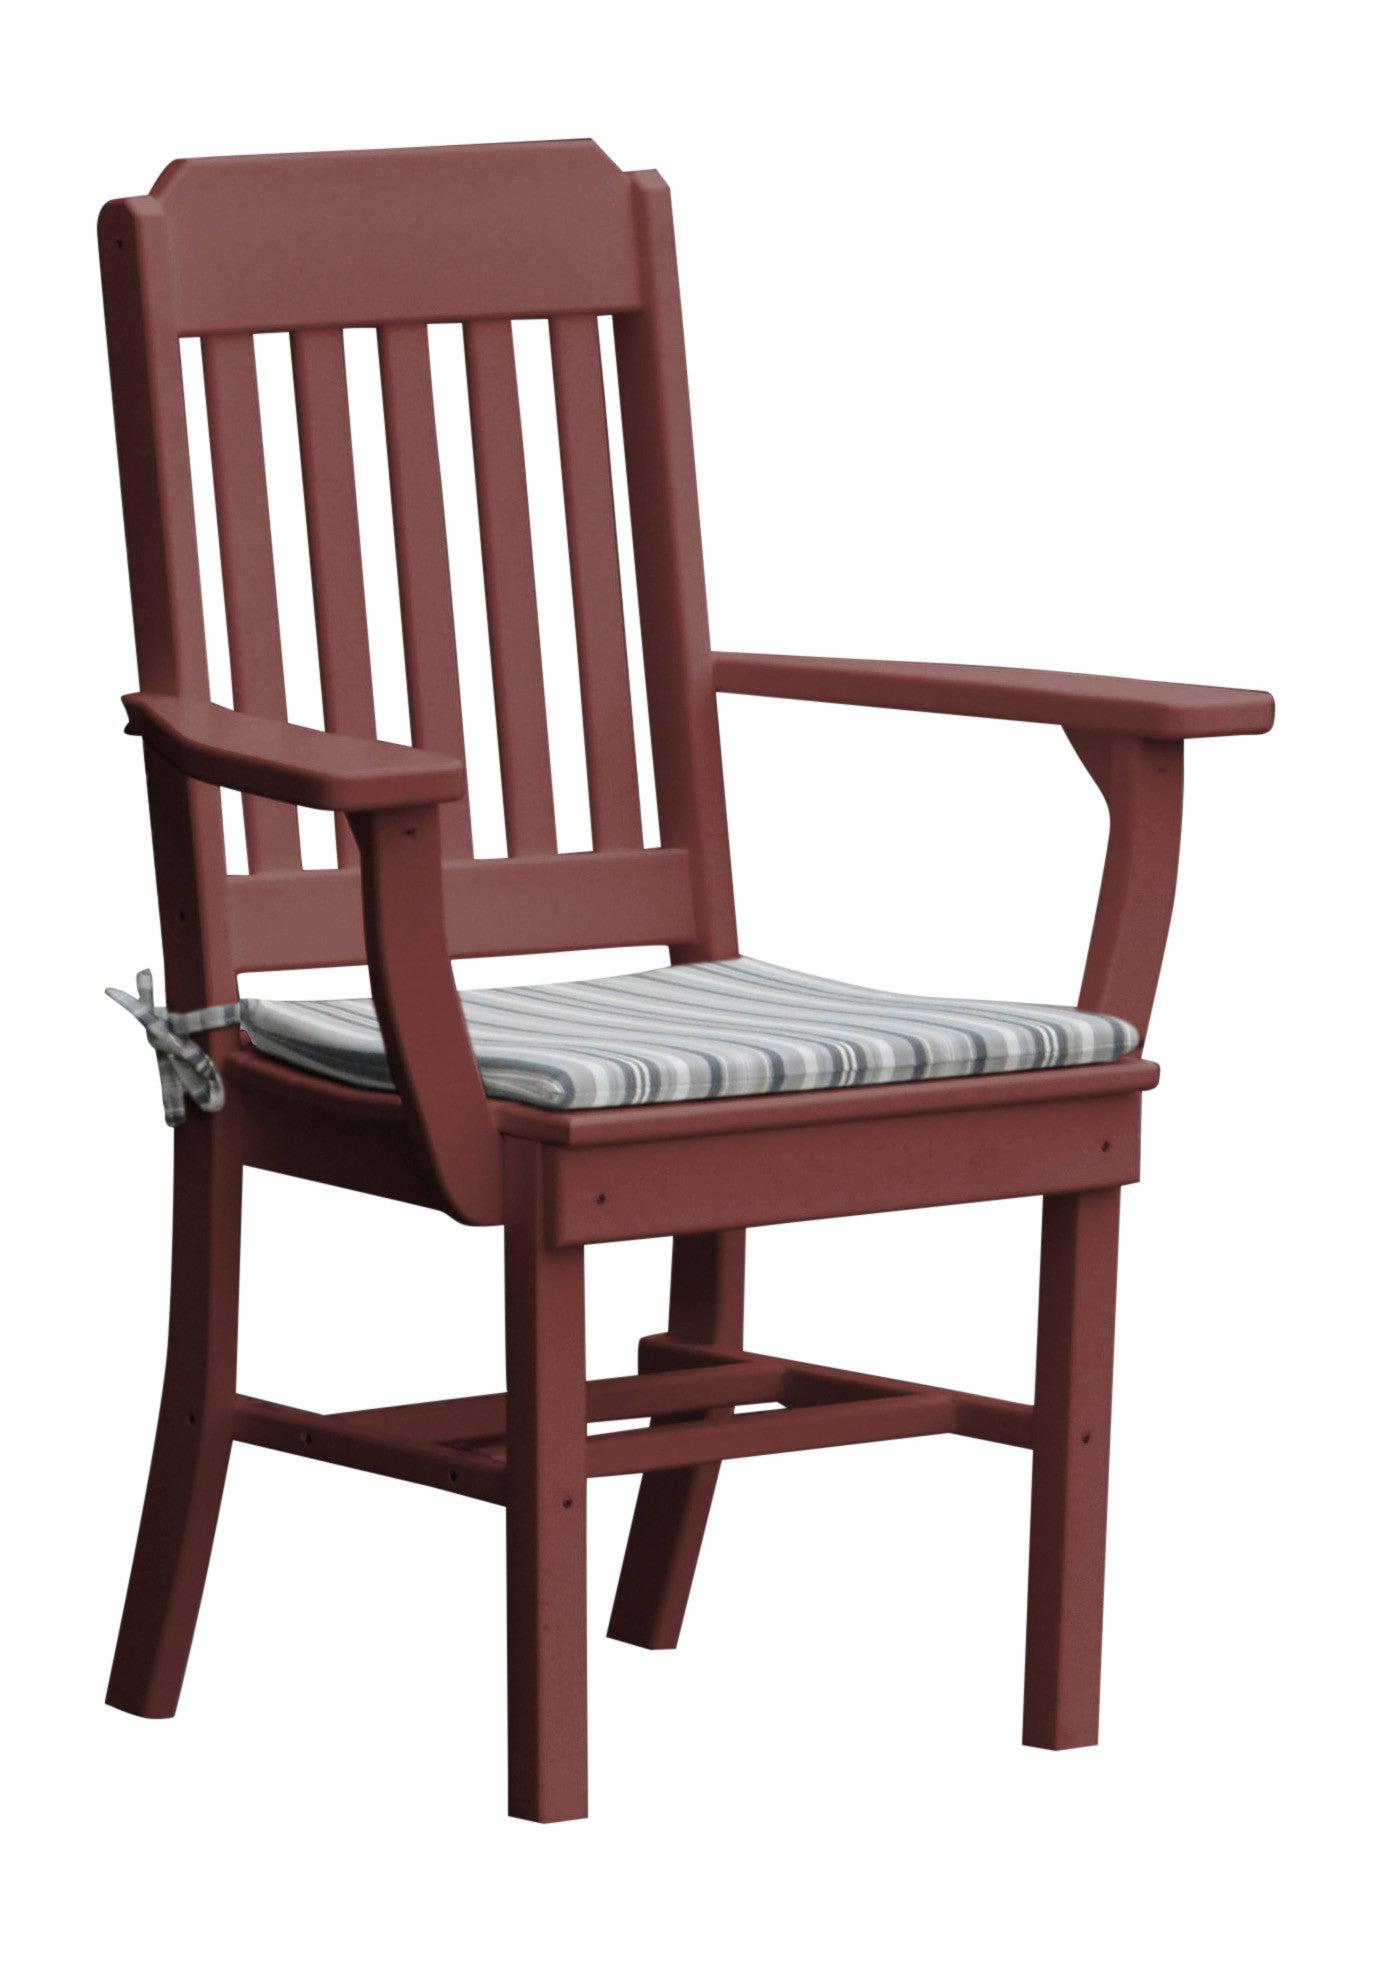 A&L Furniture Company Recycled Plastic Traditional Dining Chair w/ Arms - Cherrywood